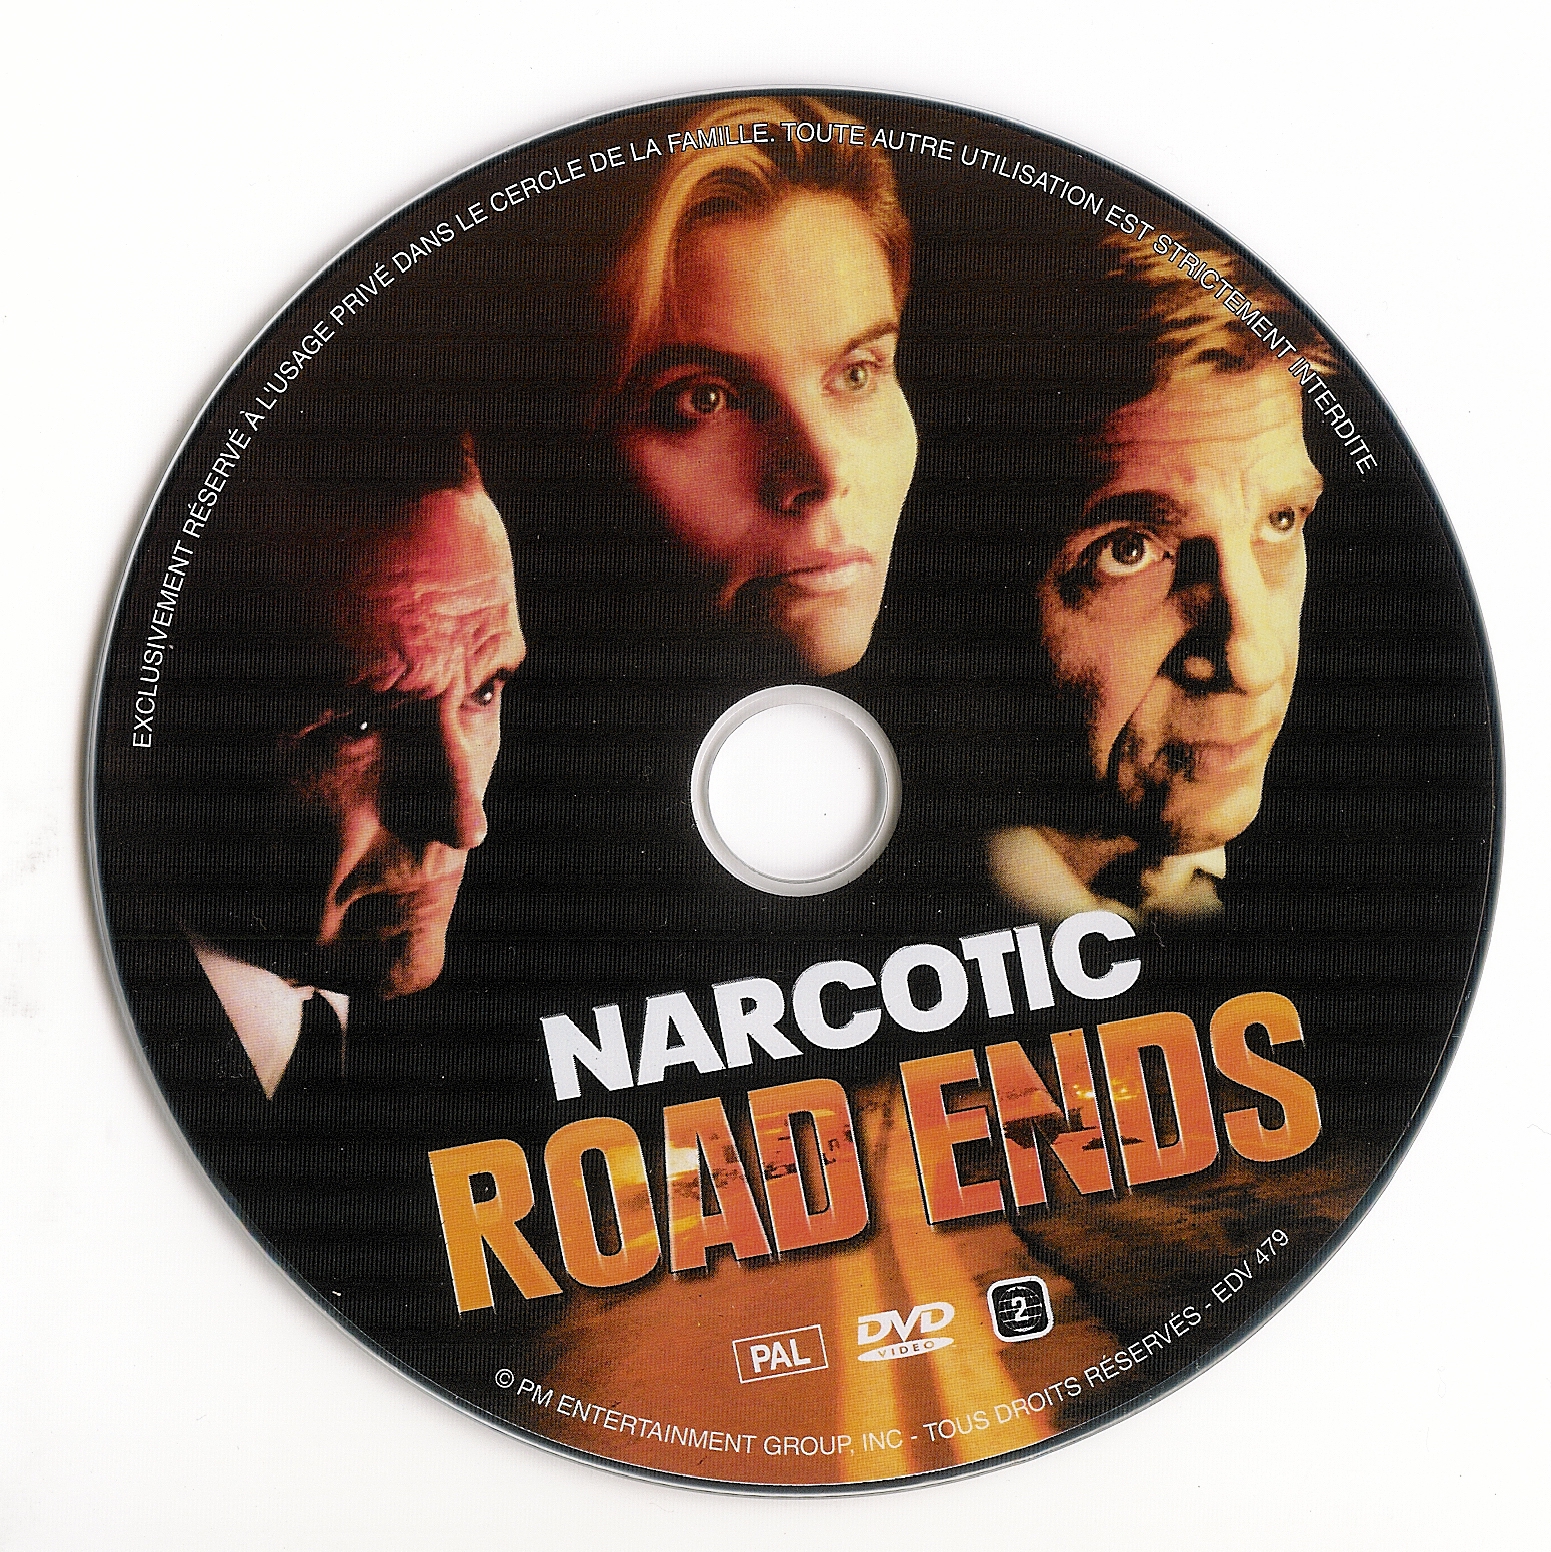 Narcotic road ends